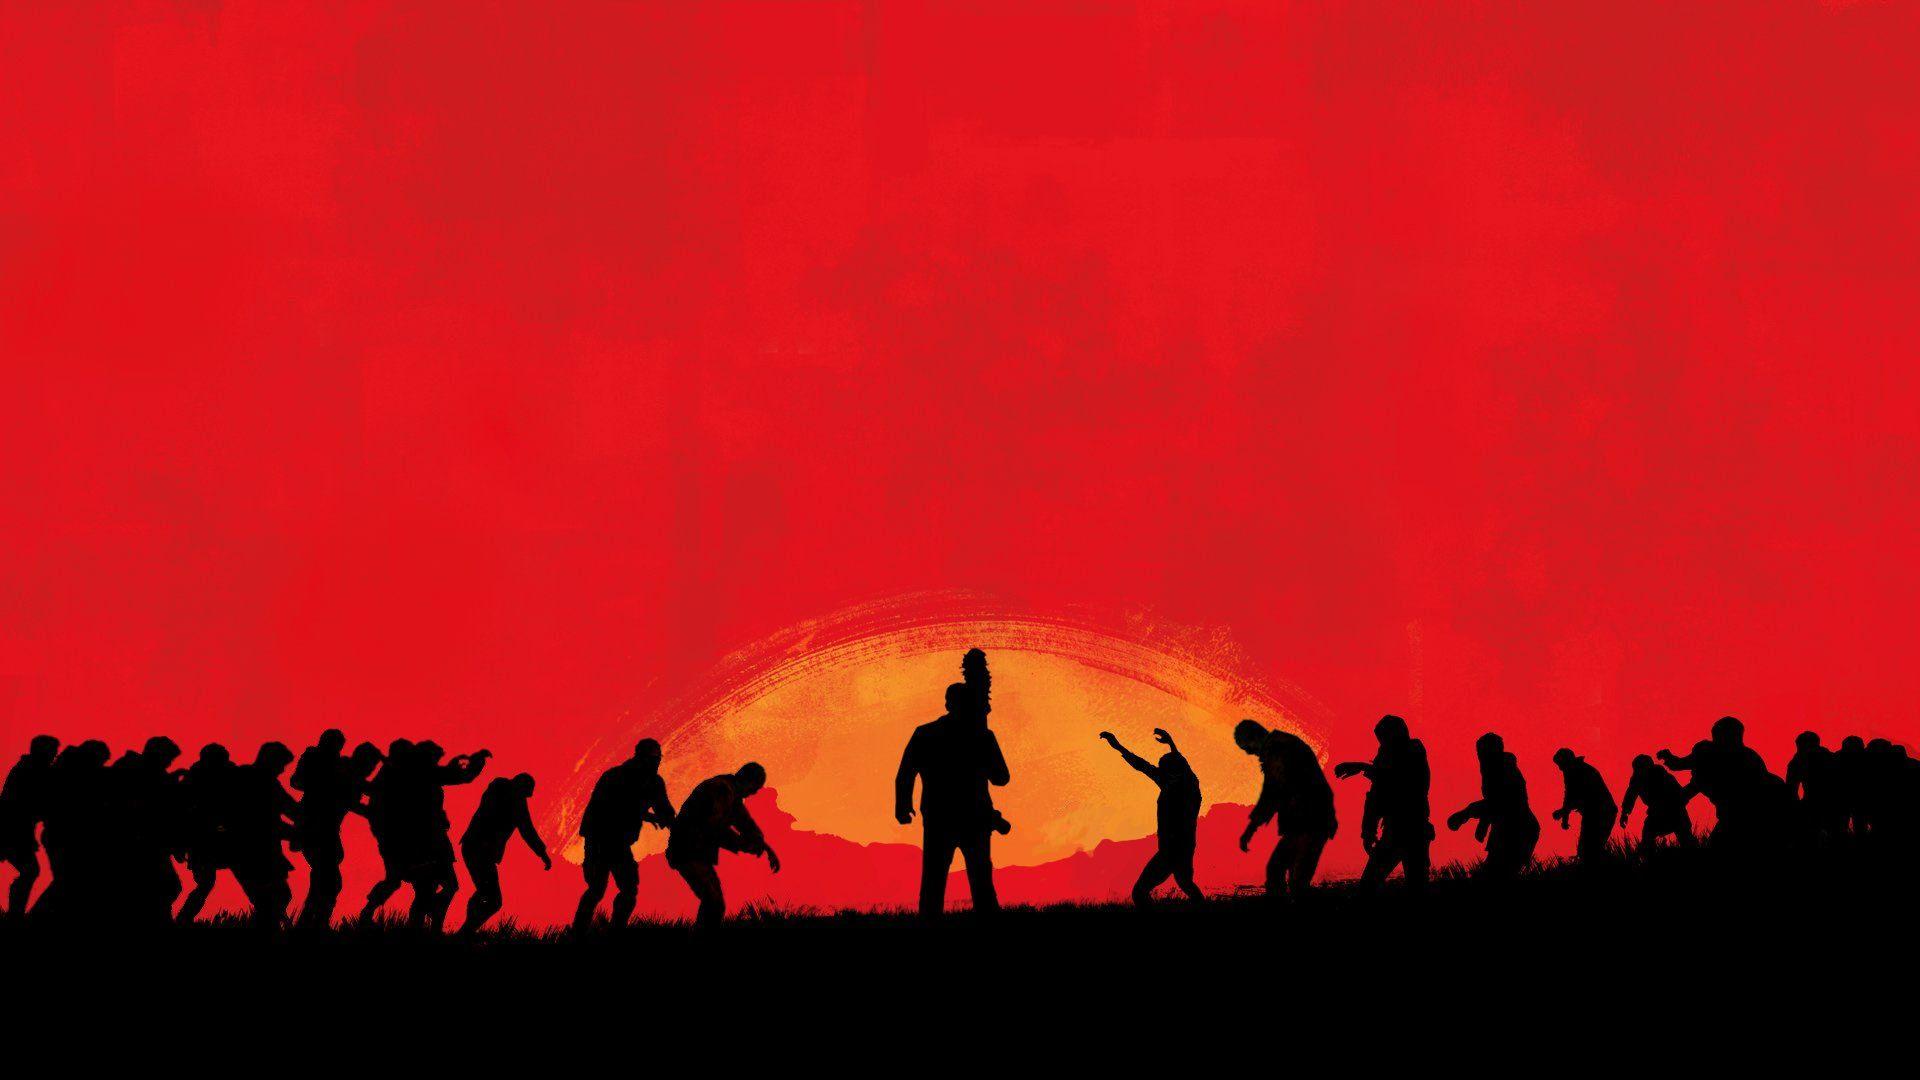 Red Dead Redemption 2 Wallpapers Top Free Red Dead